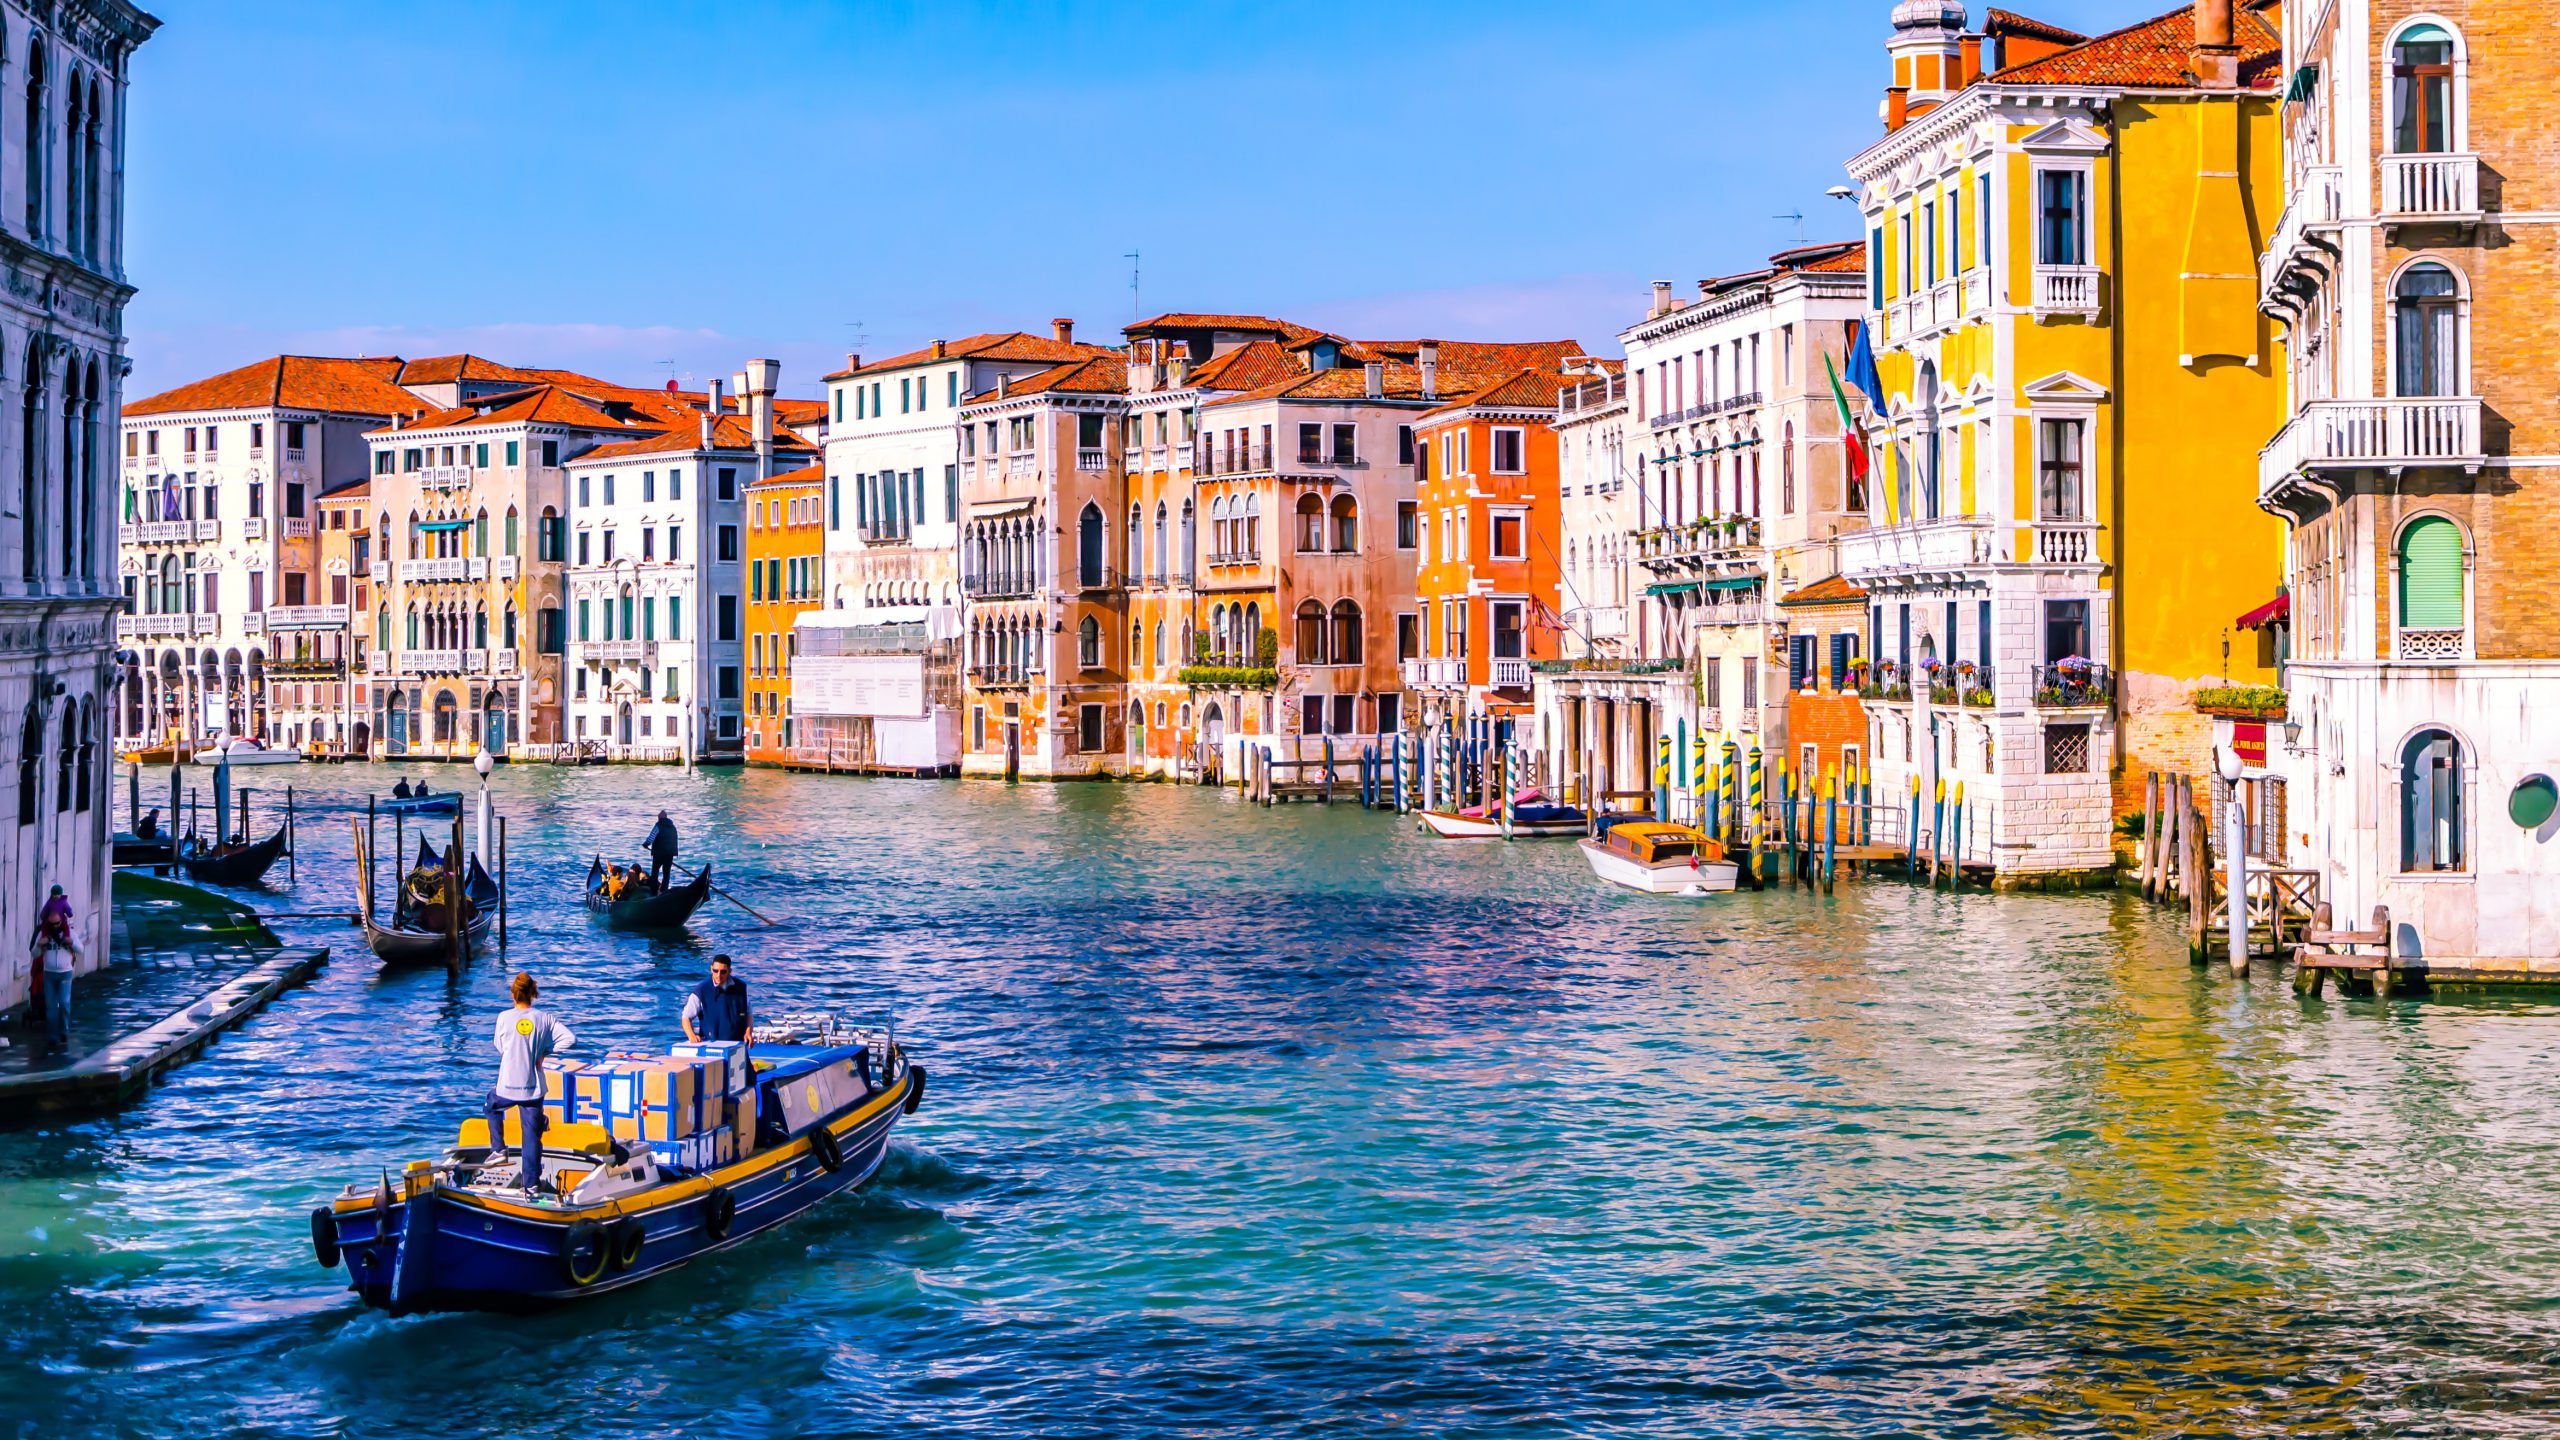 Venice In December Things To Do, Attractions, Events & Essentials